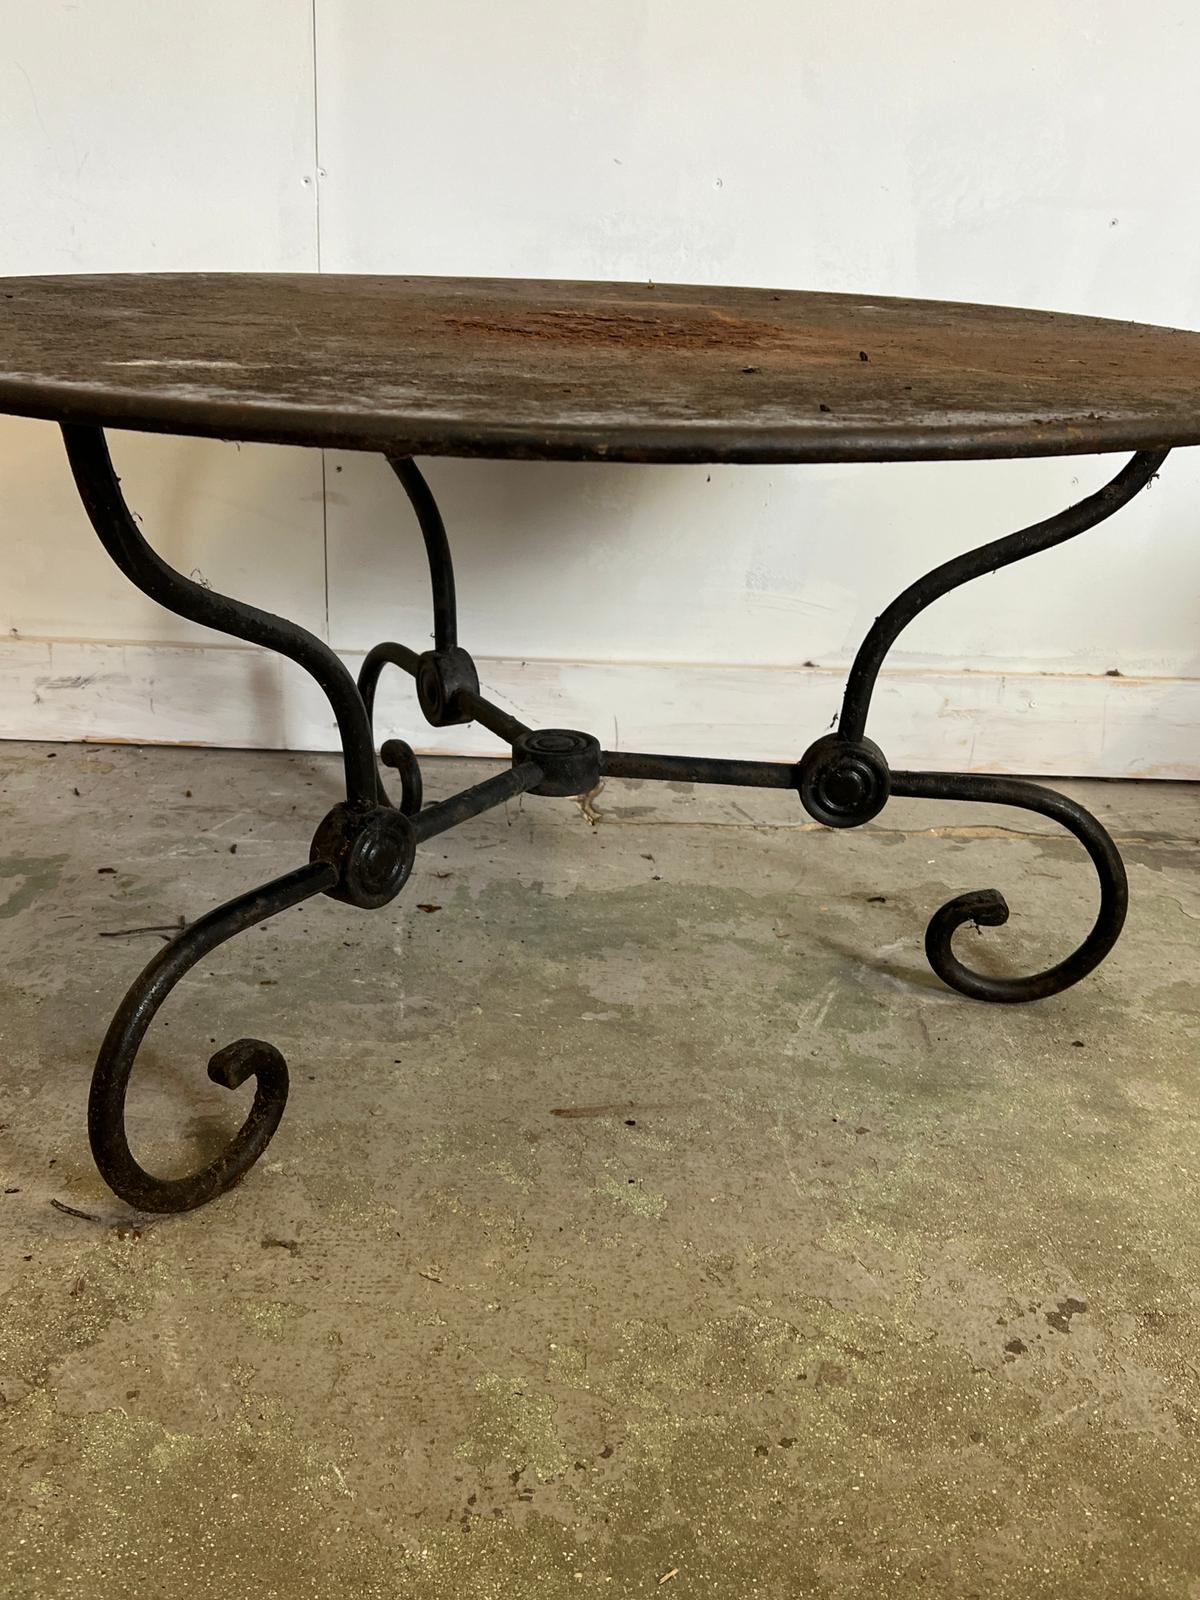 A French style round decorative garden table with scrolling iron work legs (H54cm Dia100cm) - Image 3 of 3